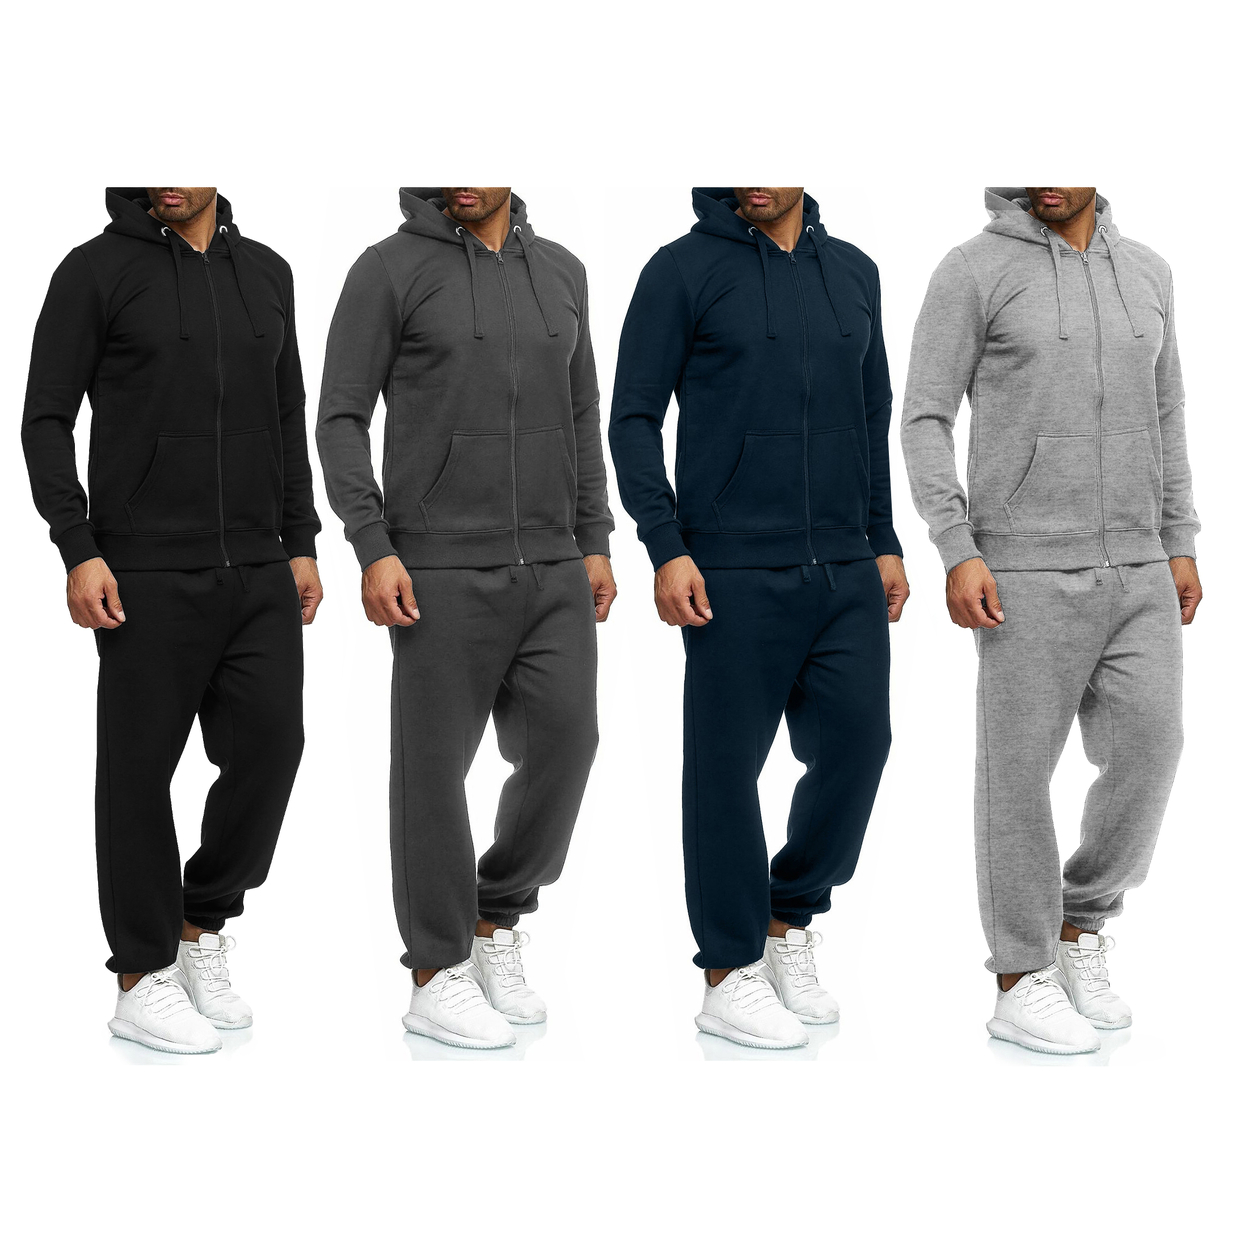 Multi-Pack: Men's Casual Big & Tall Athletic Active Winter Warm Fleece Lined Full Zip Tracksuit Jogger Set - Navy, 2-pack, Small